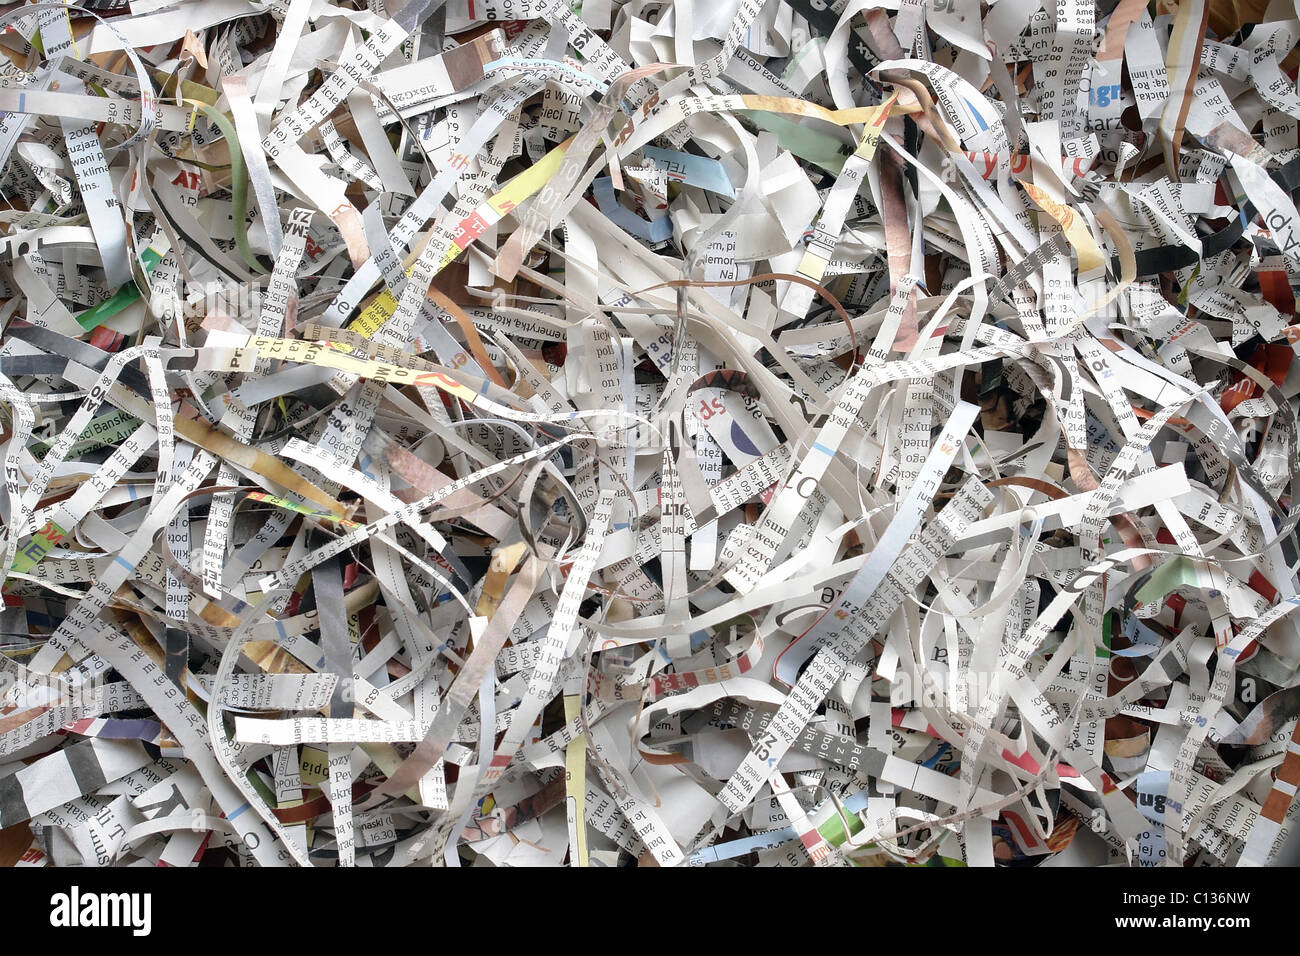 Shredded paper cuttings Stock Photo